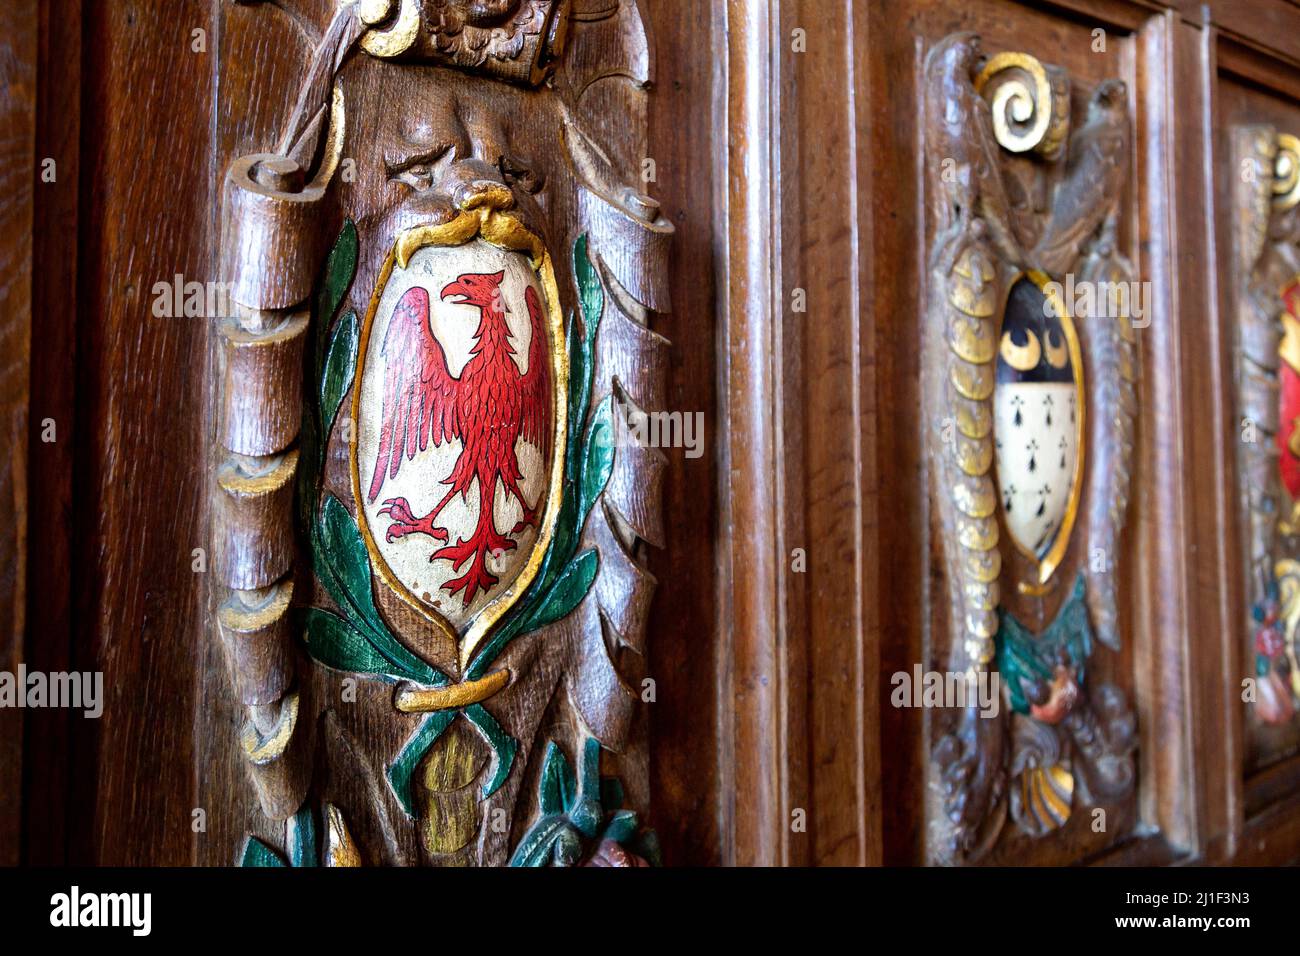 Heraldic symbols carved into wooden panels at the Jacobean Banqueting Hall at Knebworth House, Hertfordshire, UK Stock Photo